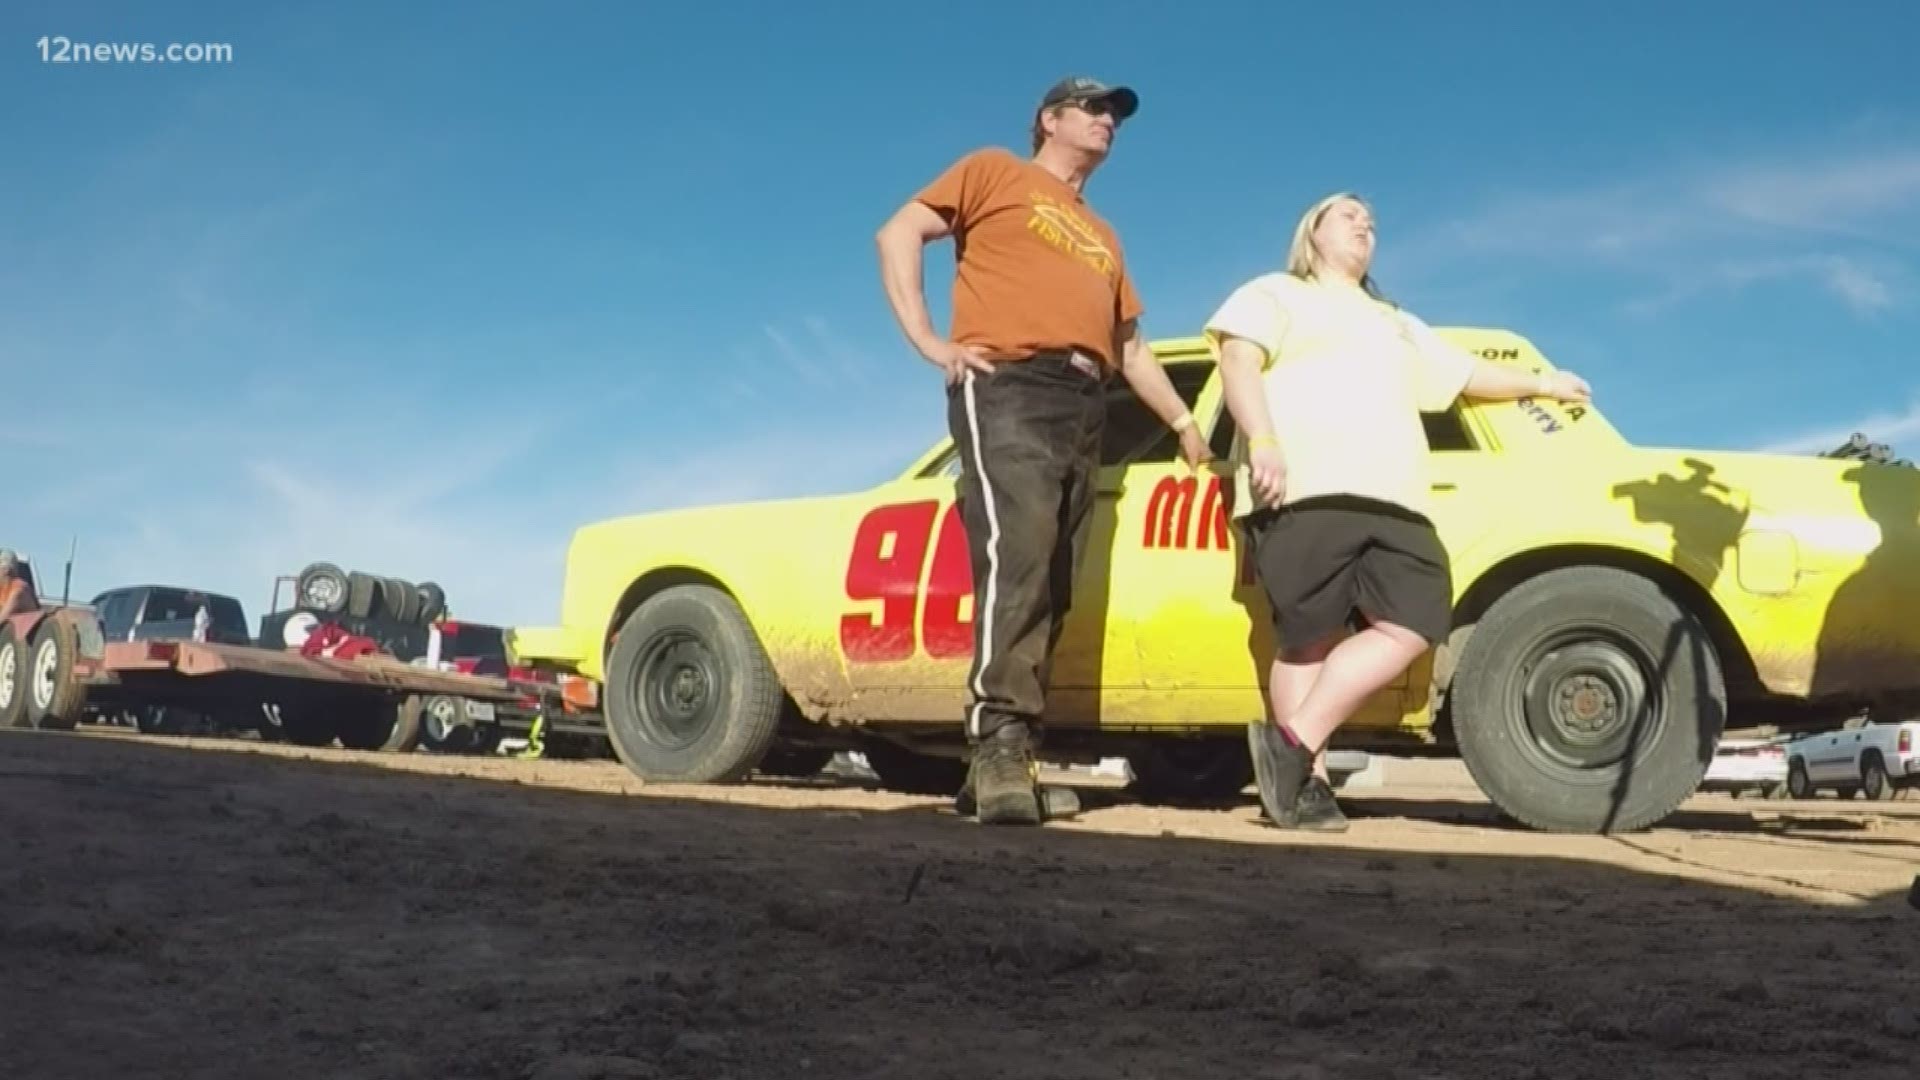 Arizona resident Ron Neis recently surprised his niece with a race car in honor of her father.